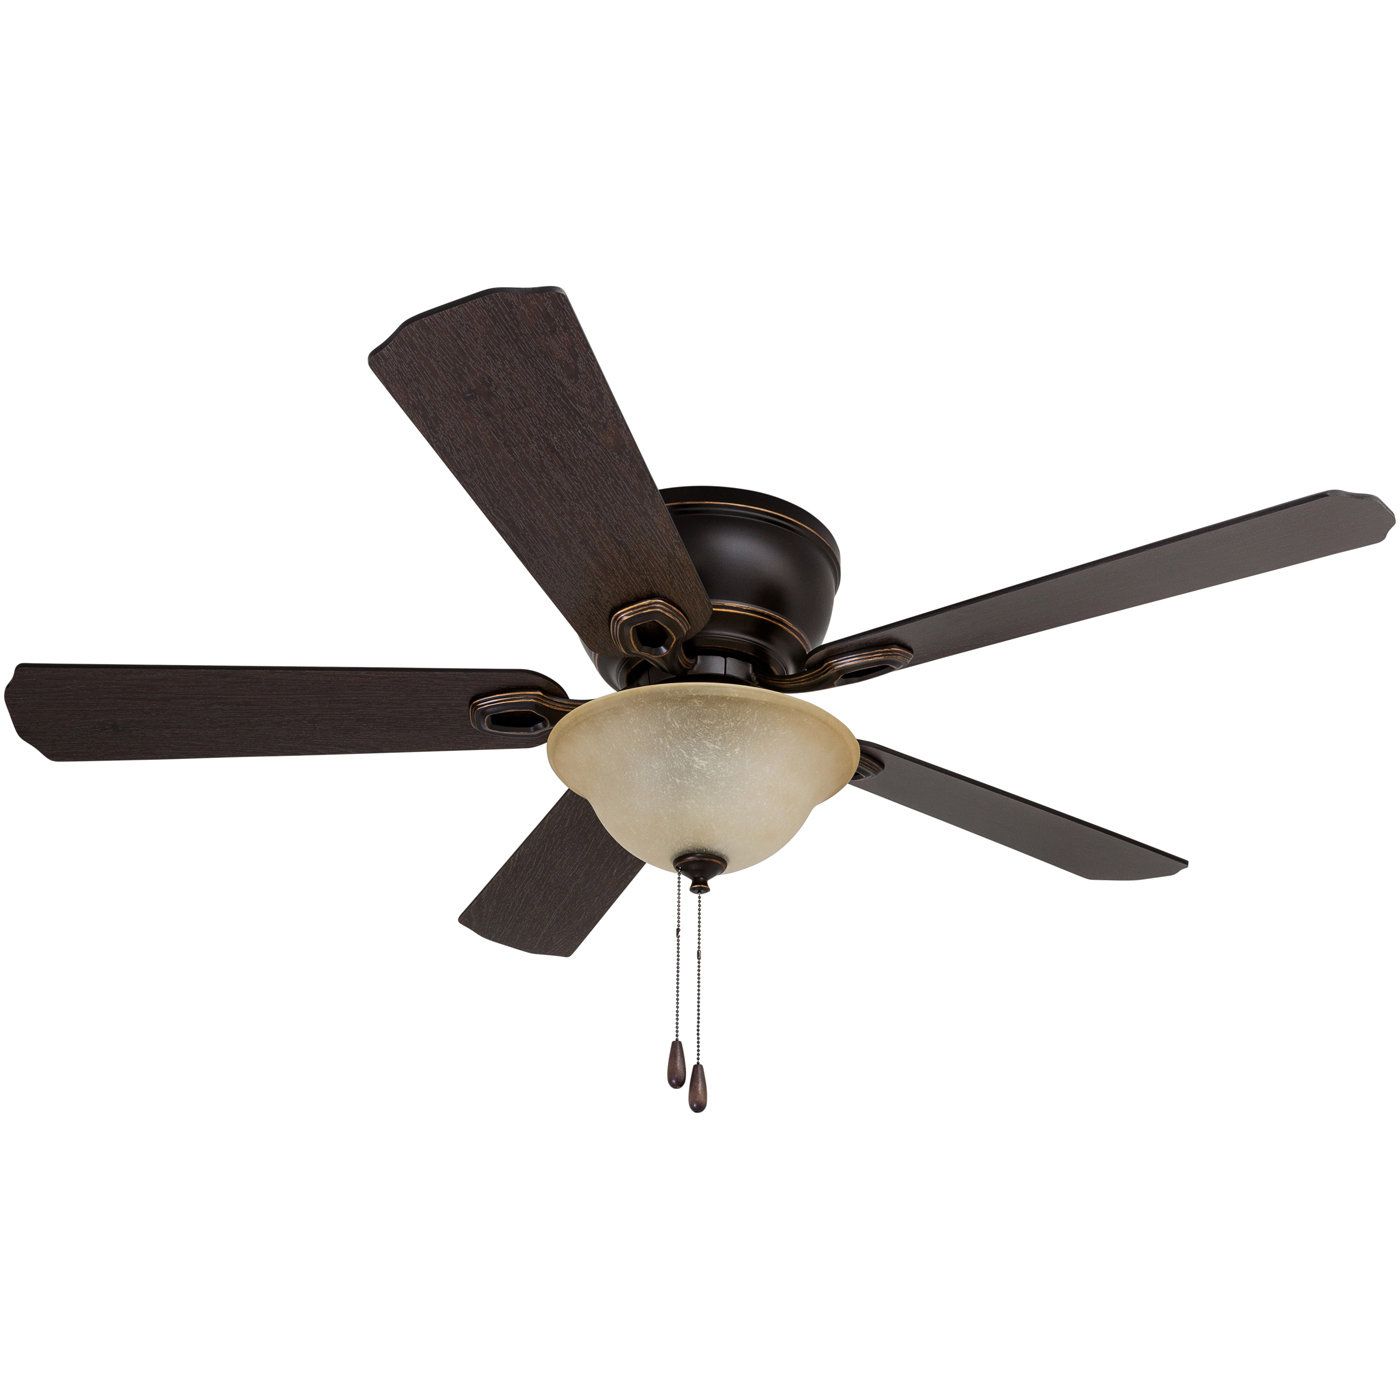 52" Shawn 5 Blade Ceiling Fan Throughout Recent Auden 5 Blade Led Ceiling Fans (View 2 of 20)